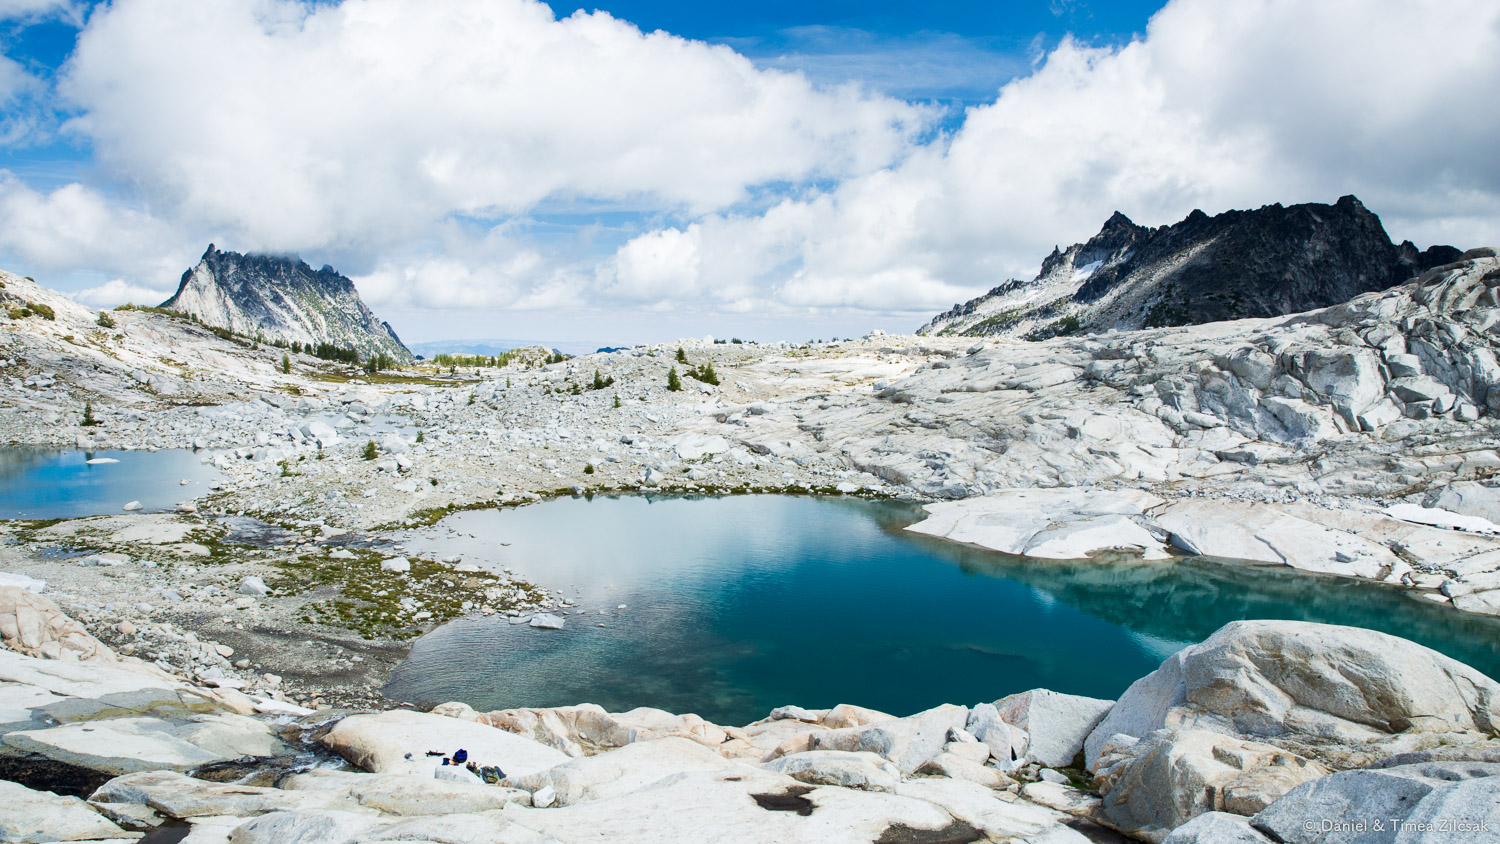 Backpacking the upper core Enchantments, granite and alpine lakes and clouds- 9Z4A2849 © Zilcsak.jpg